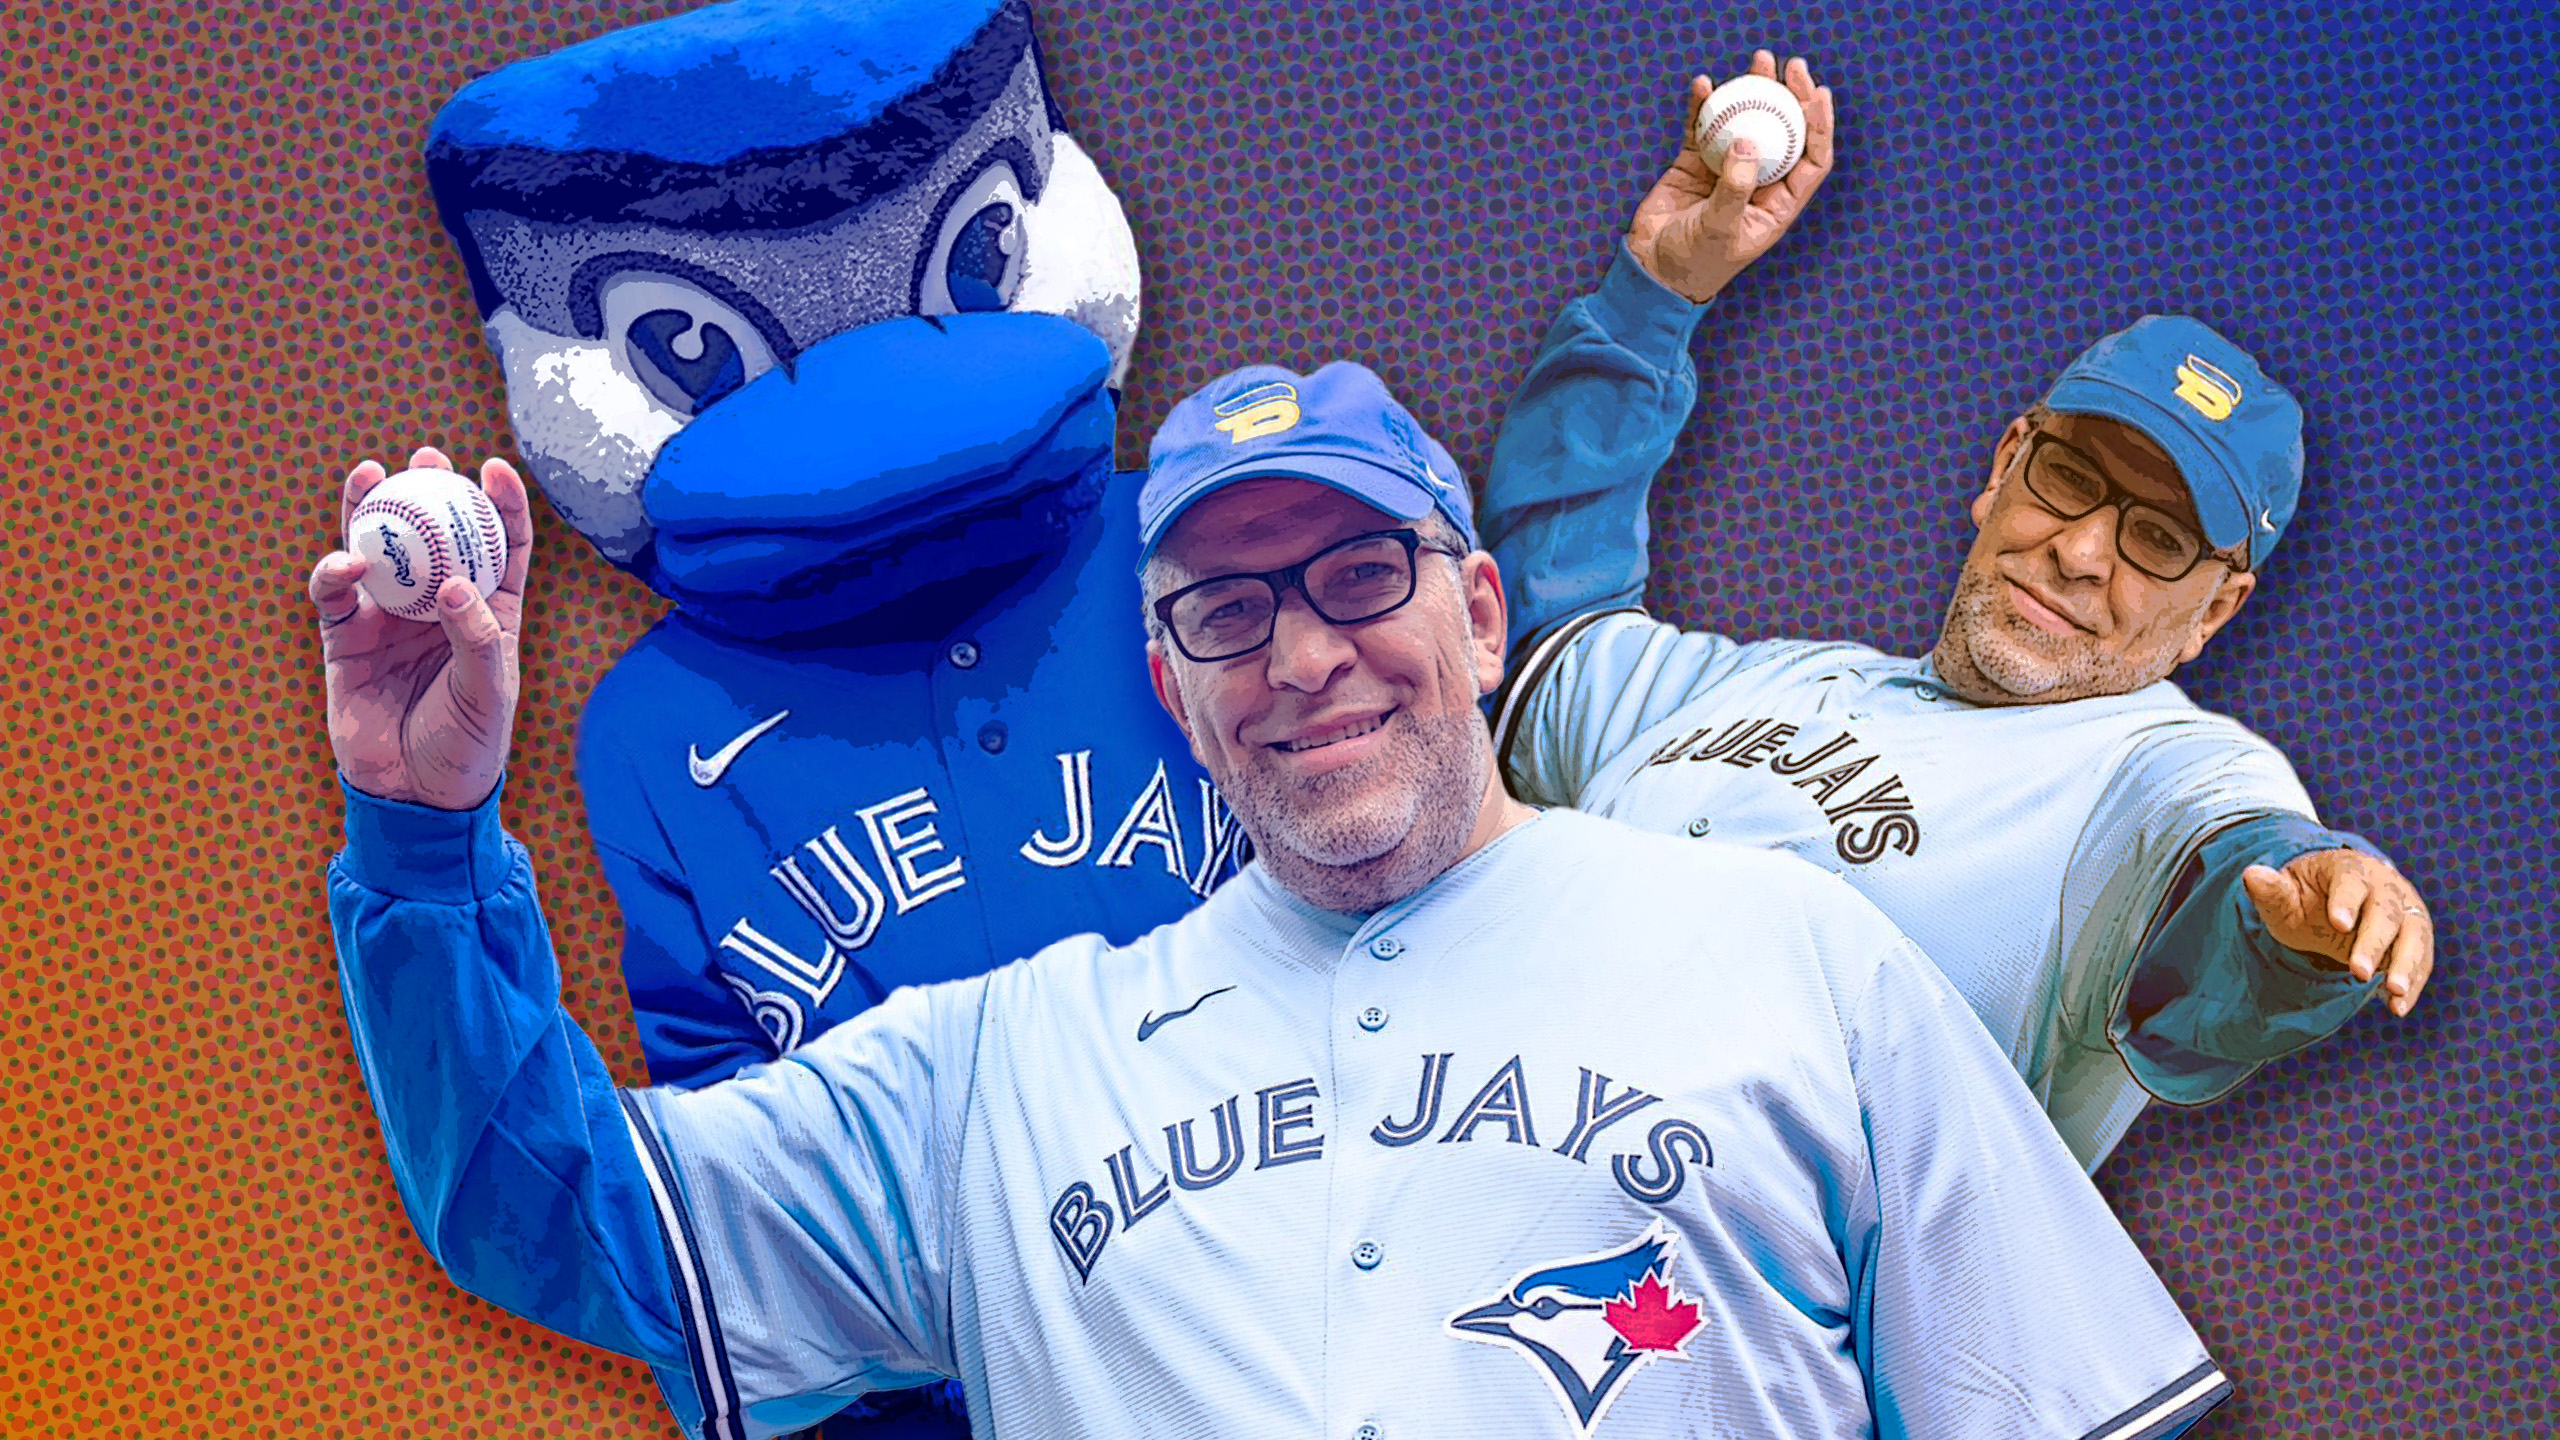 The coolest job I ever had was being a Toronto Blue Jays mascot